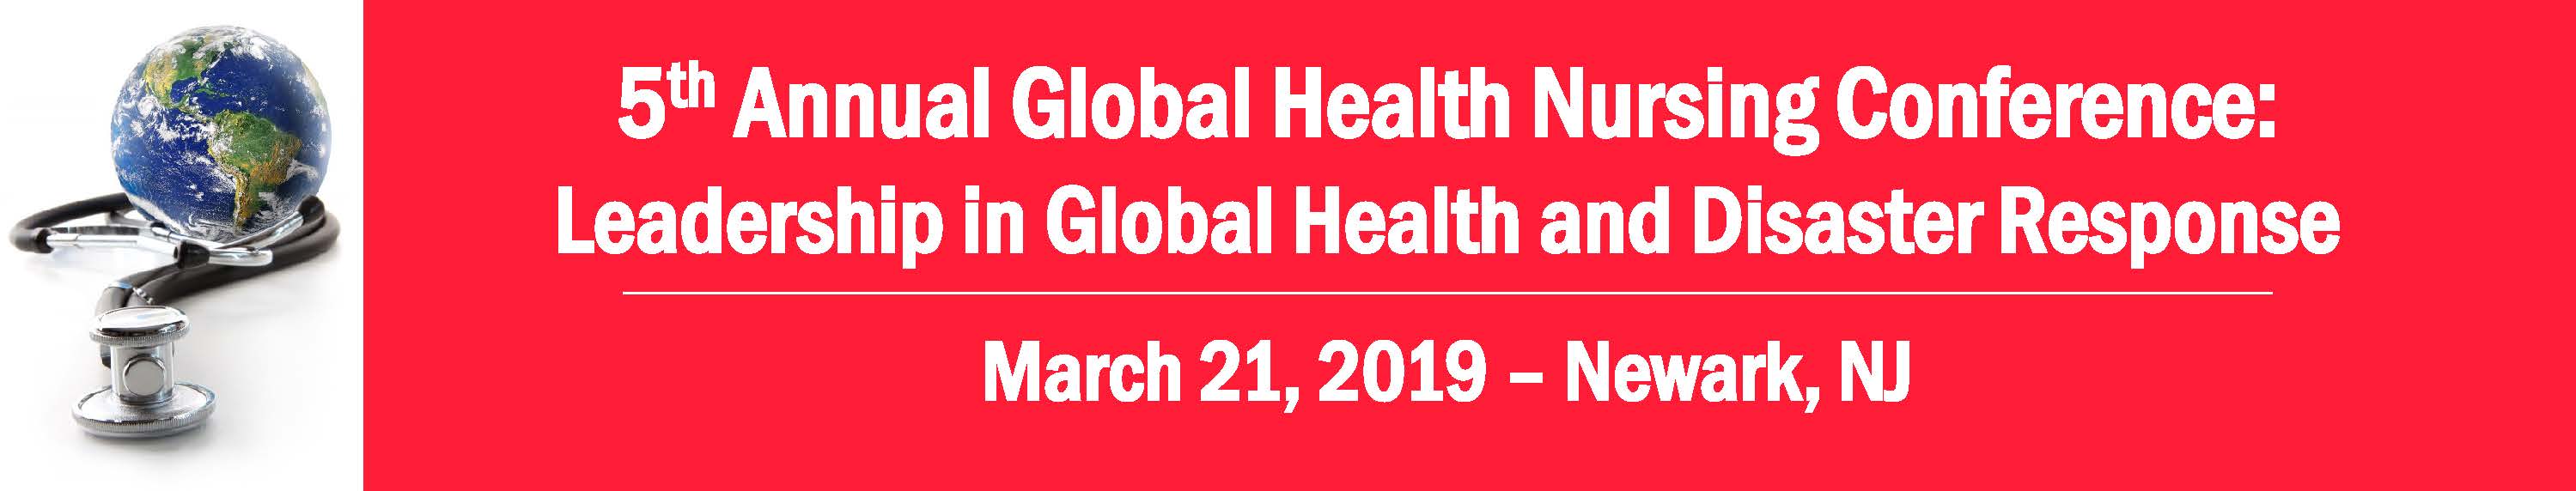 5th Annual Global Health Conference Leadership in Global Health and